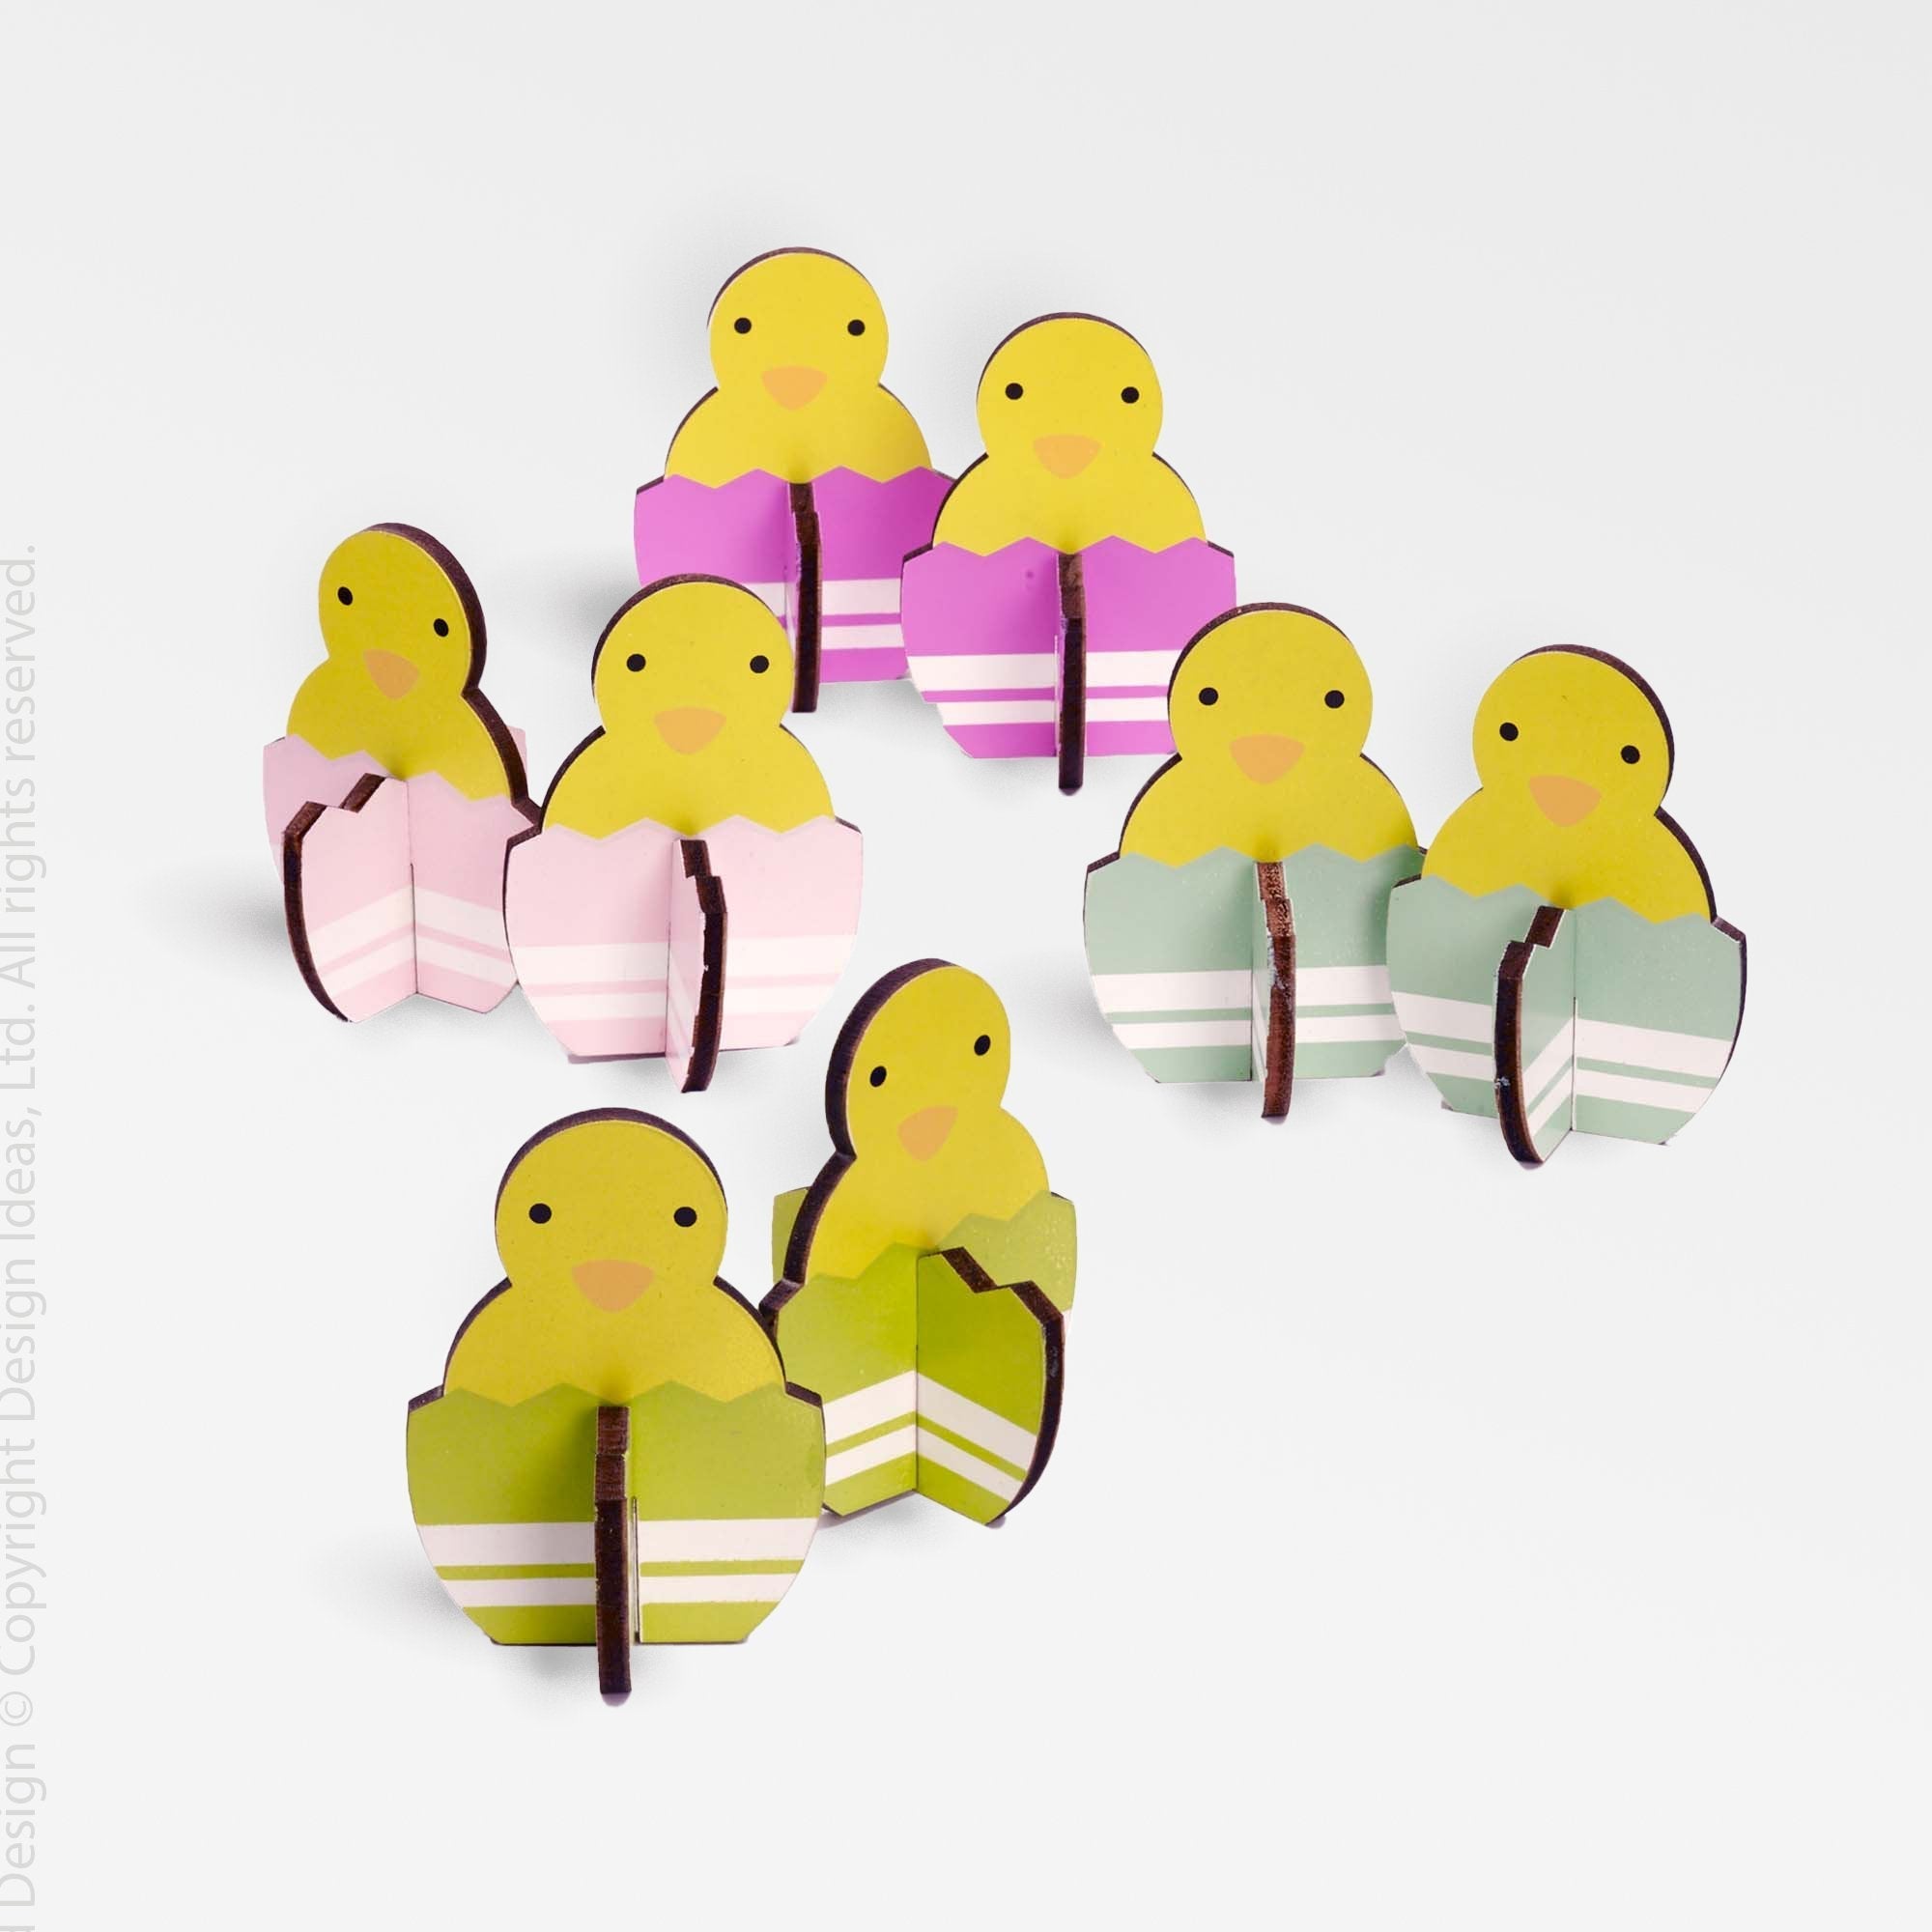 Springchick decorations (set of 8) - Assorted Colors | Image 1 | Premium Decorative from the Easterly collection | made with Wood for long lasting use | texxture